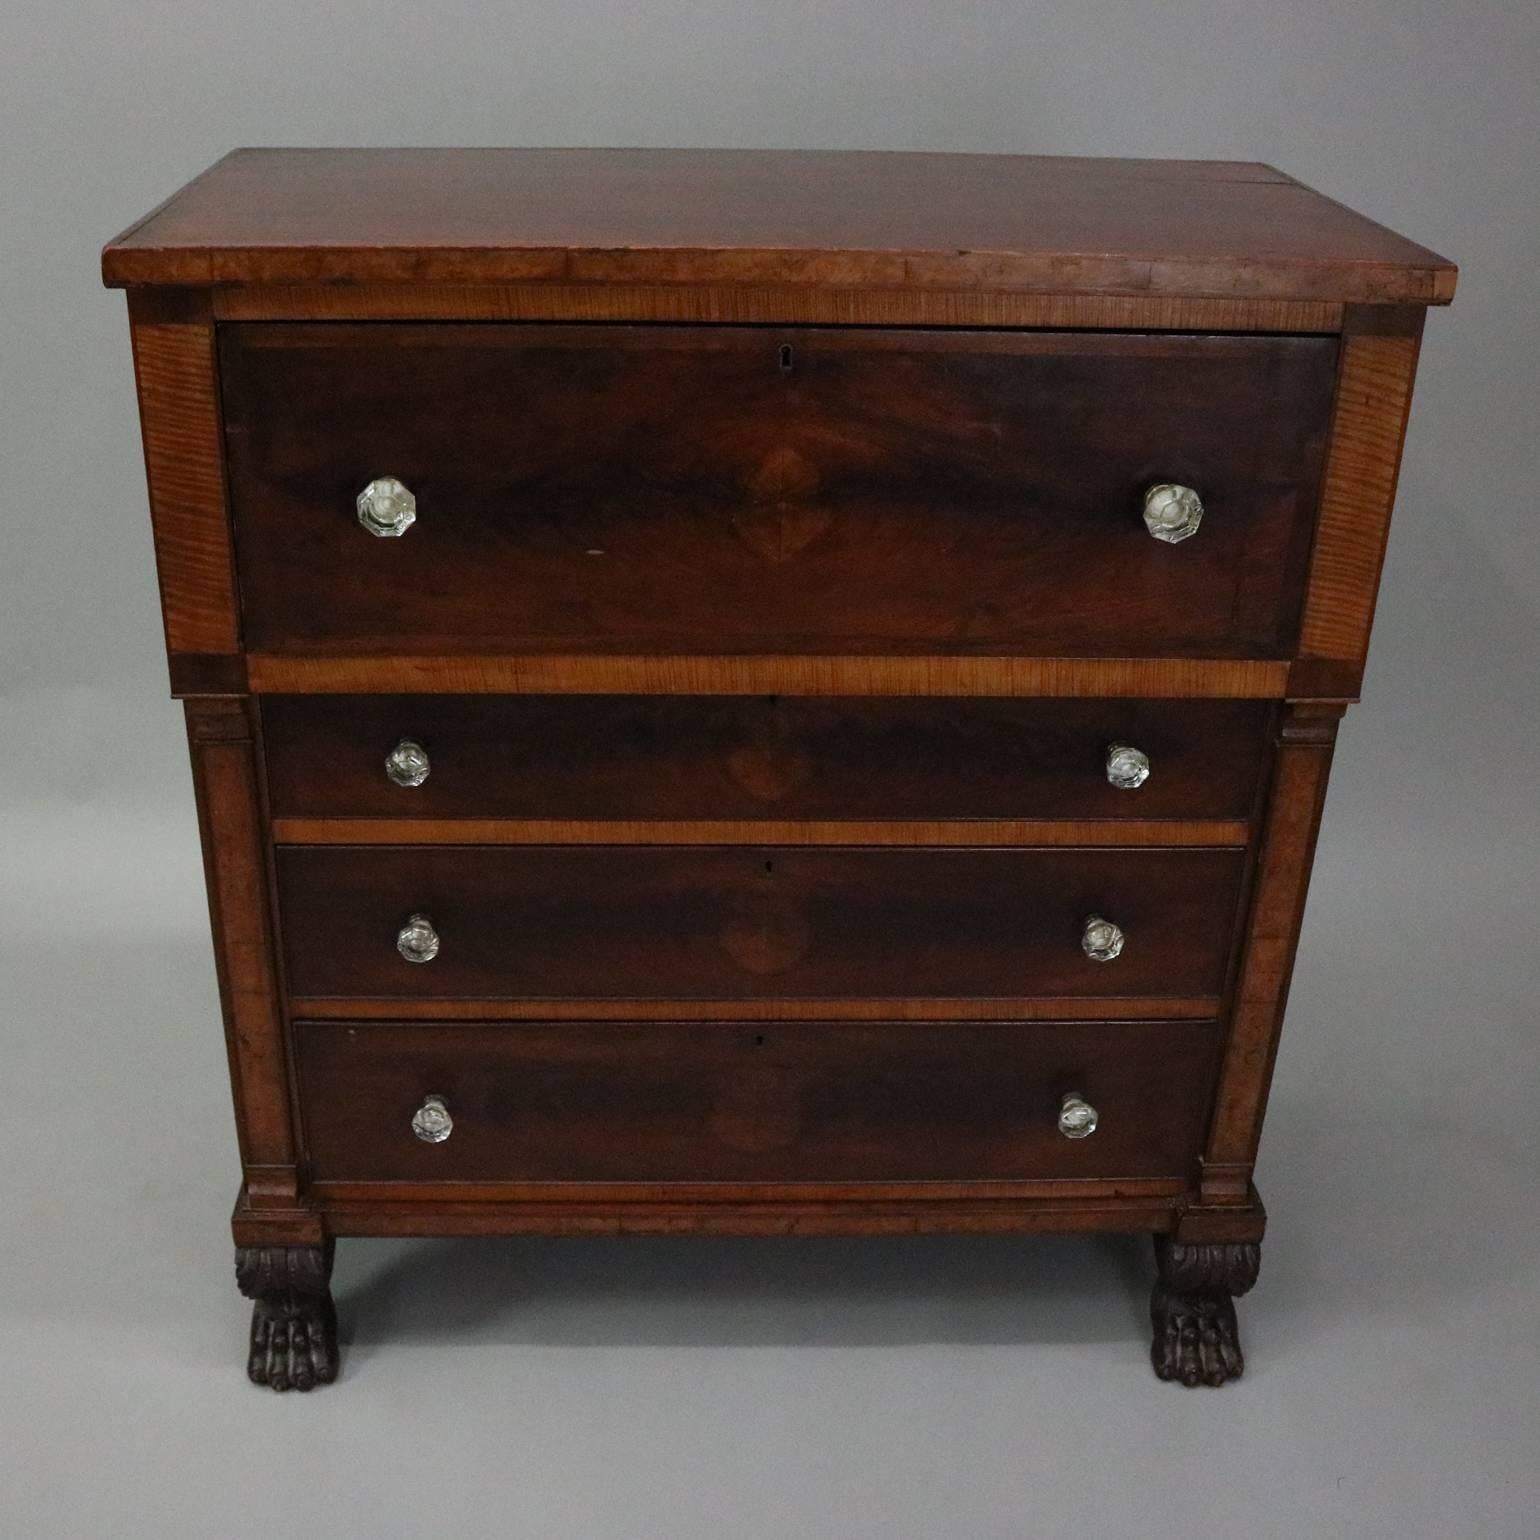 Antique American Empire flame mahogany butler's chest features bookmatched flame mahogany drawers with tiger maple and burl facing, front drops to reveal writing surface and interior storage compartments with drawers, central compartment with inlaid